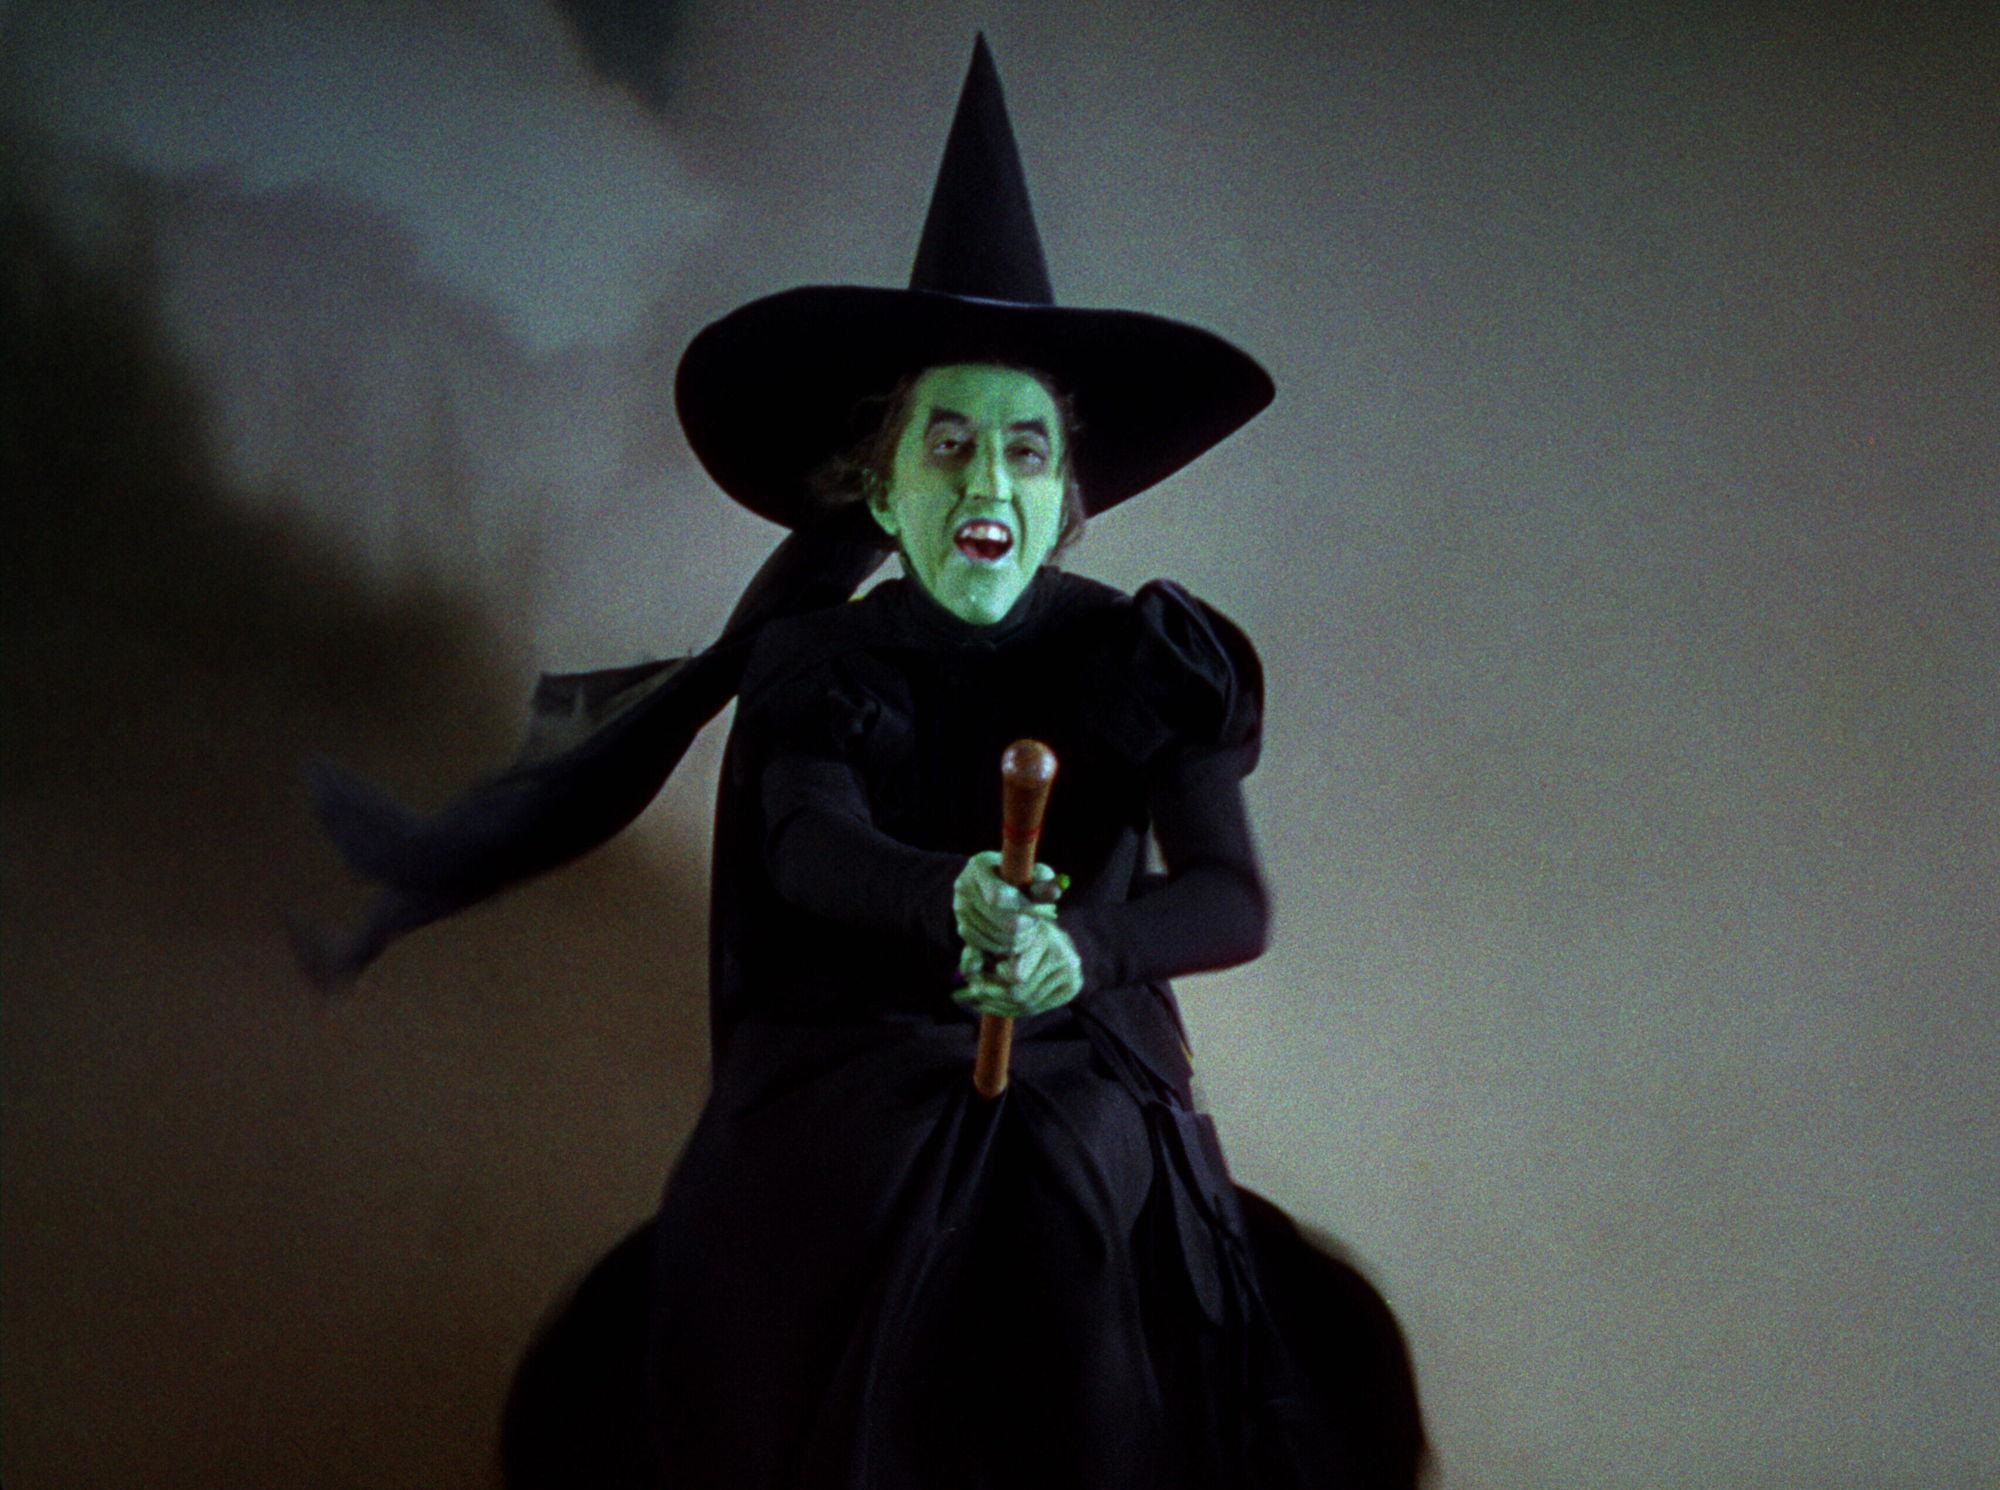 The Wicked Witch Of The West.